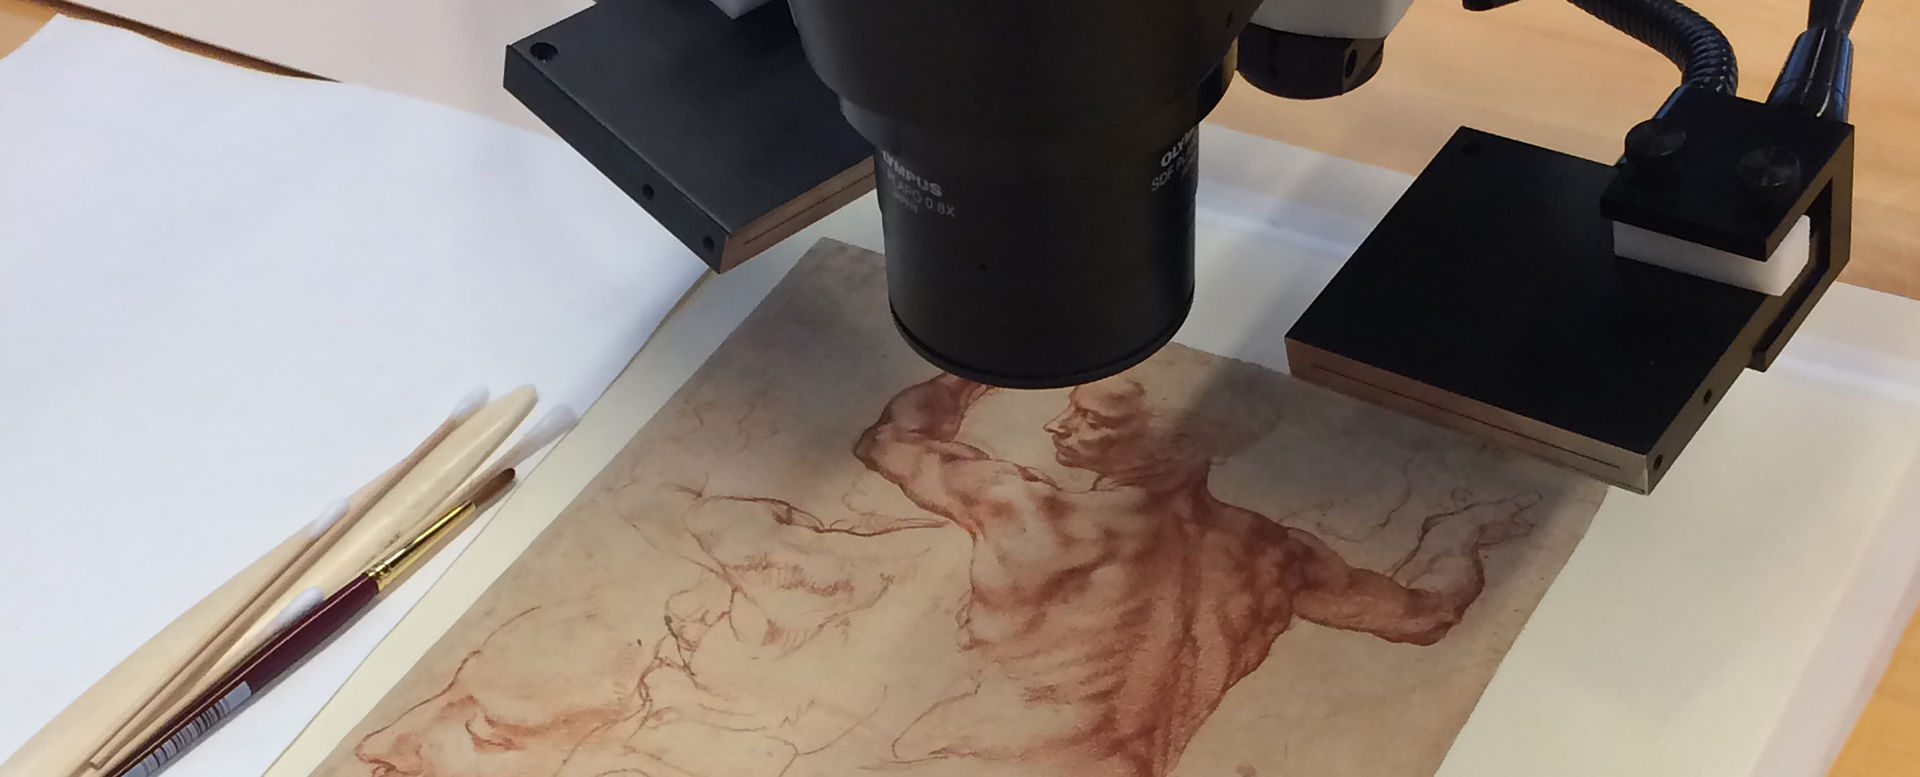 A Michelangelo drawing under a microscope with paintbrushes to its left